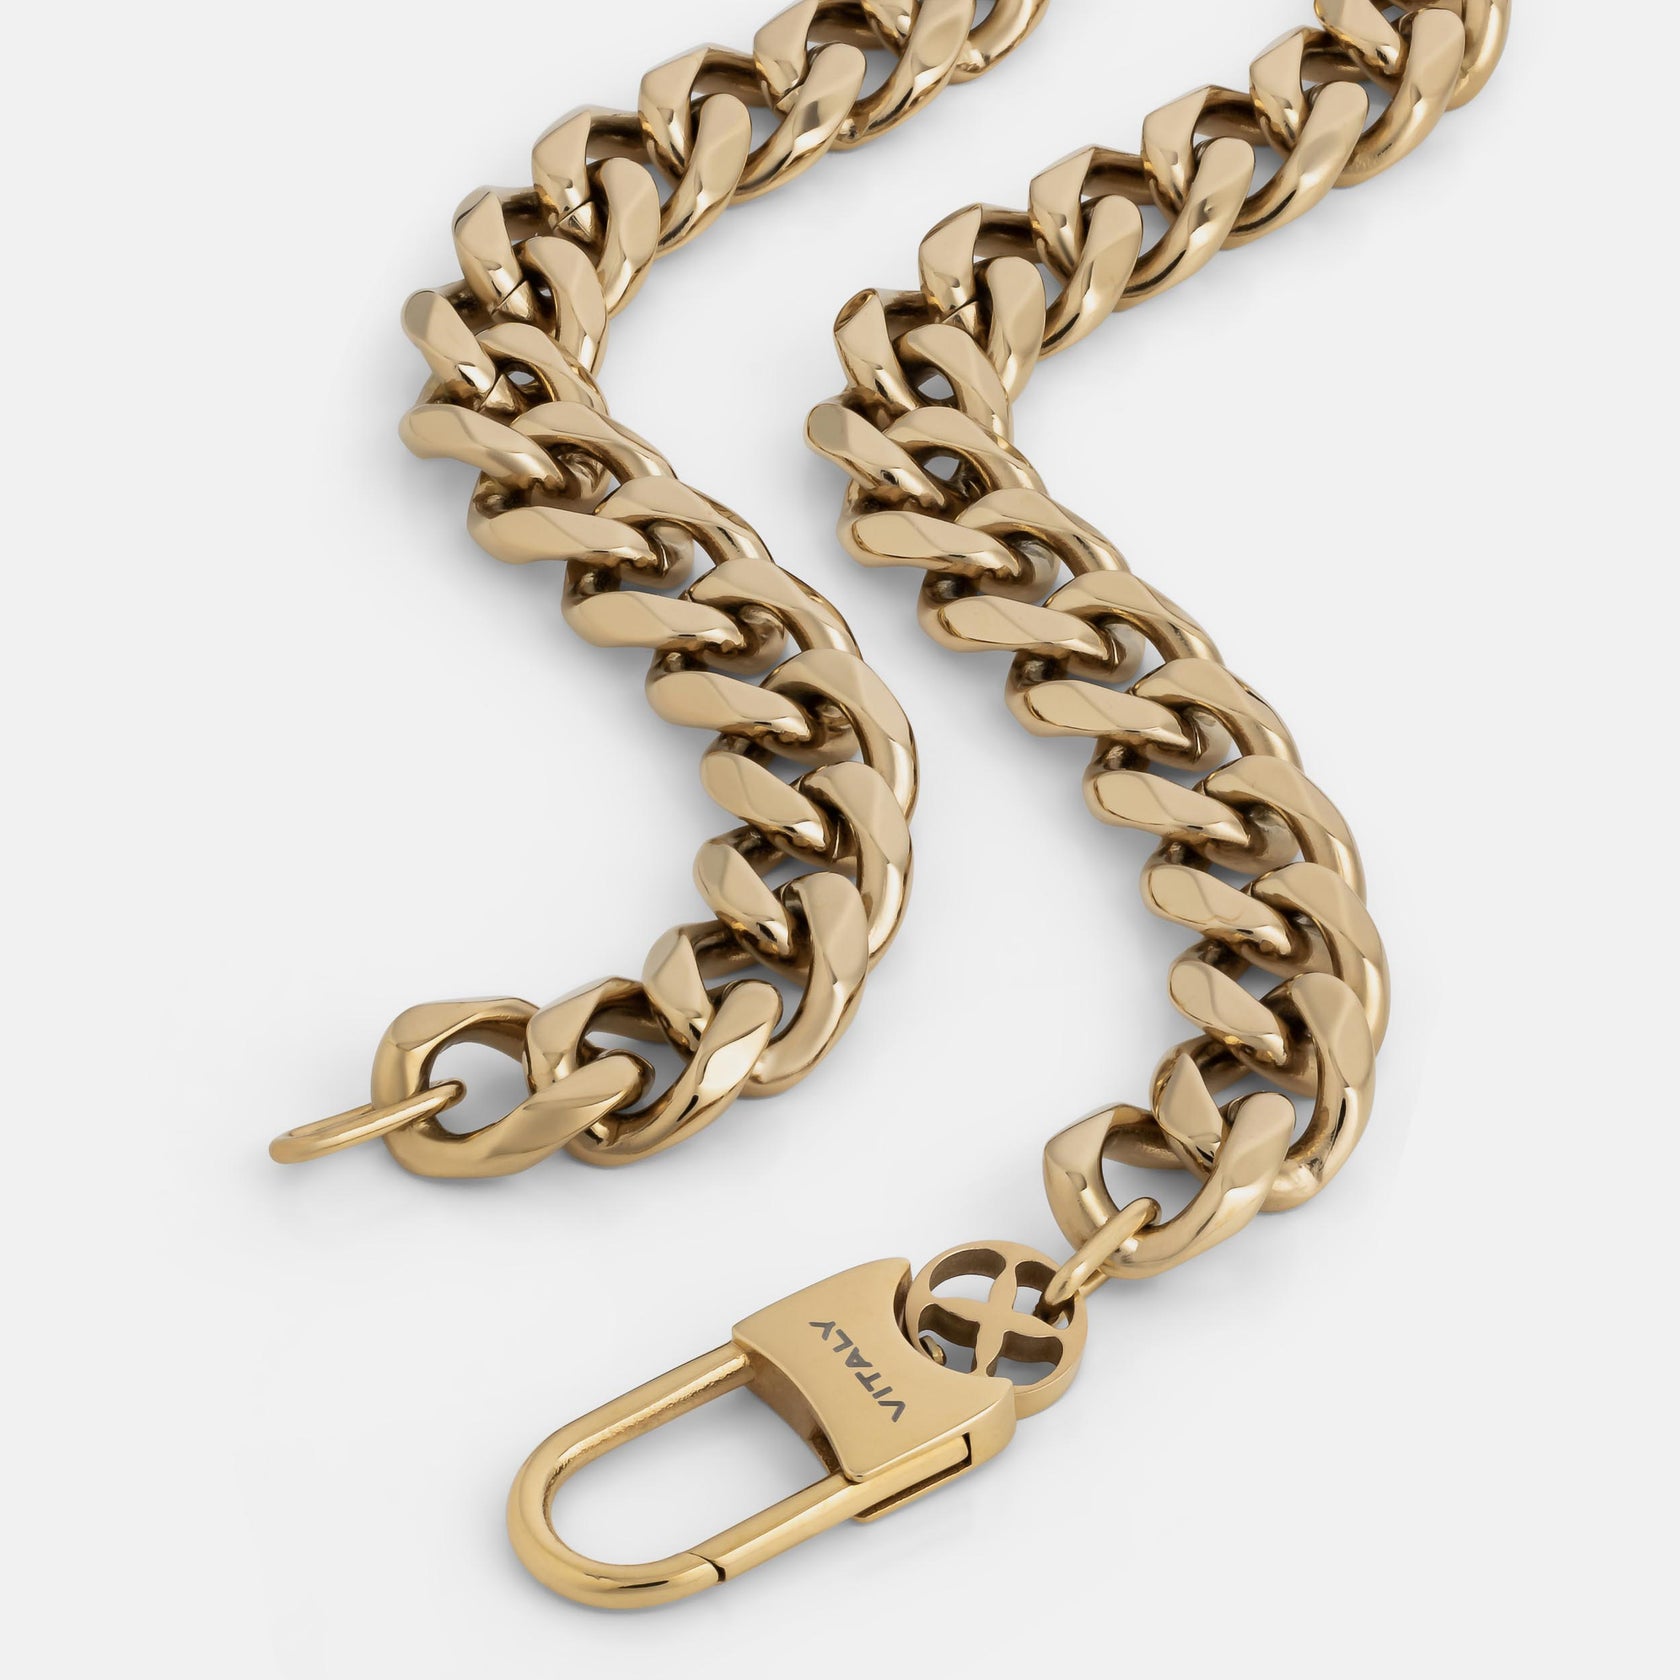 Vitaly Transit Choker Chain | 100% Recycled Stainless Steel Accessories